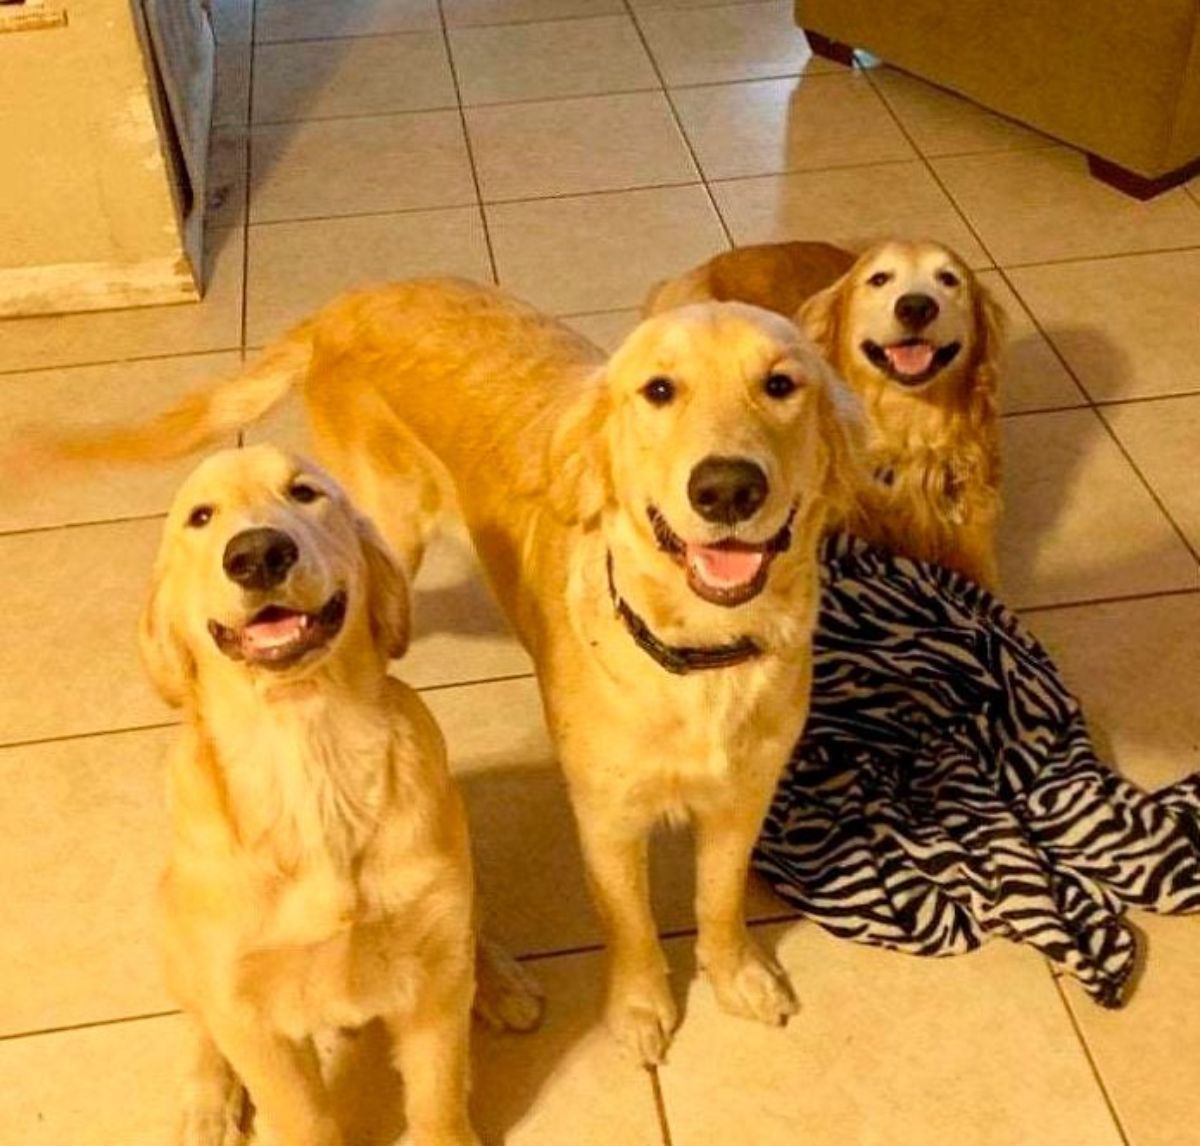 3 golden retrievers smiling at the amera with one sitting, a second standing and a third laying on the floor behind a black and white zebra print bag on the floor